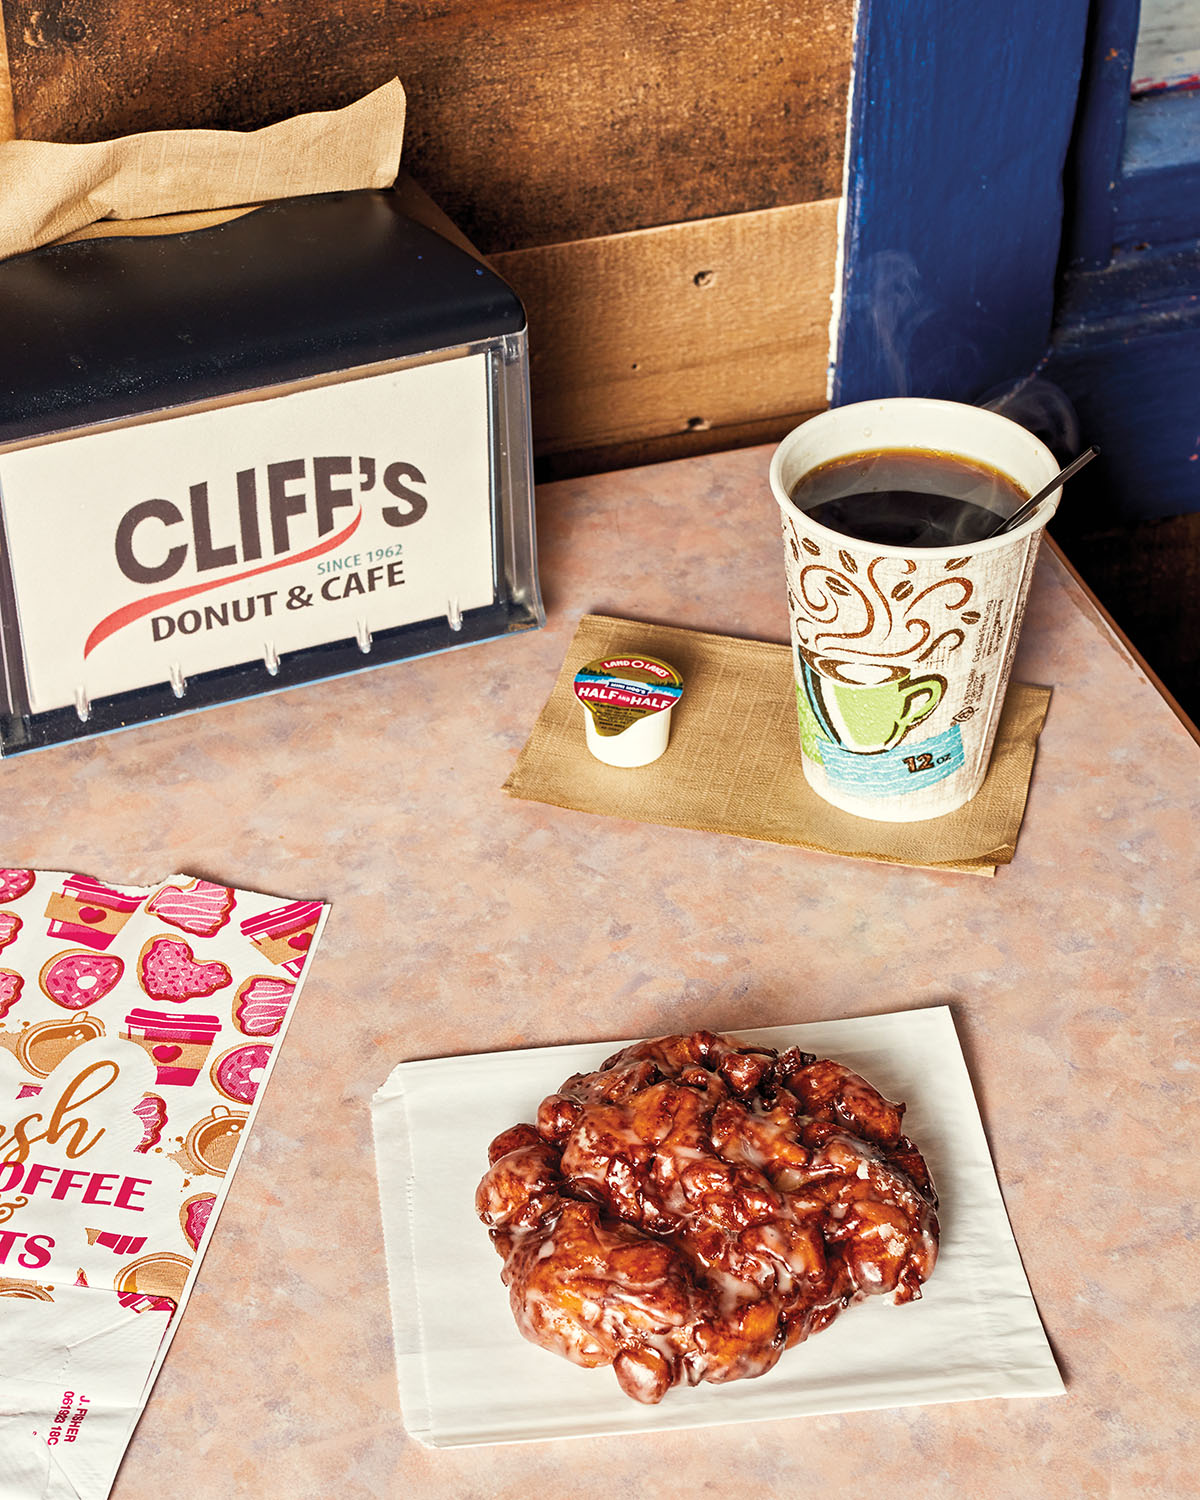 An overhead view of a golden apple fritter on a napkin next to a cup of coffee